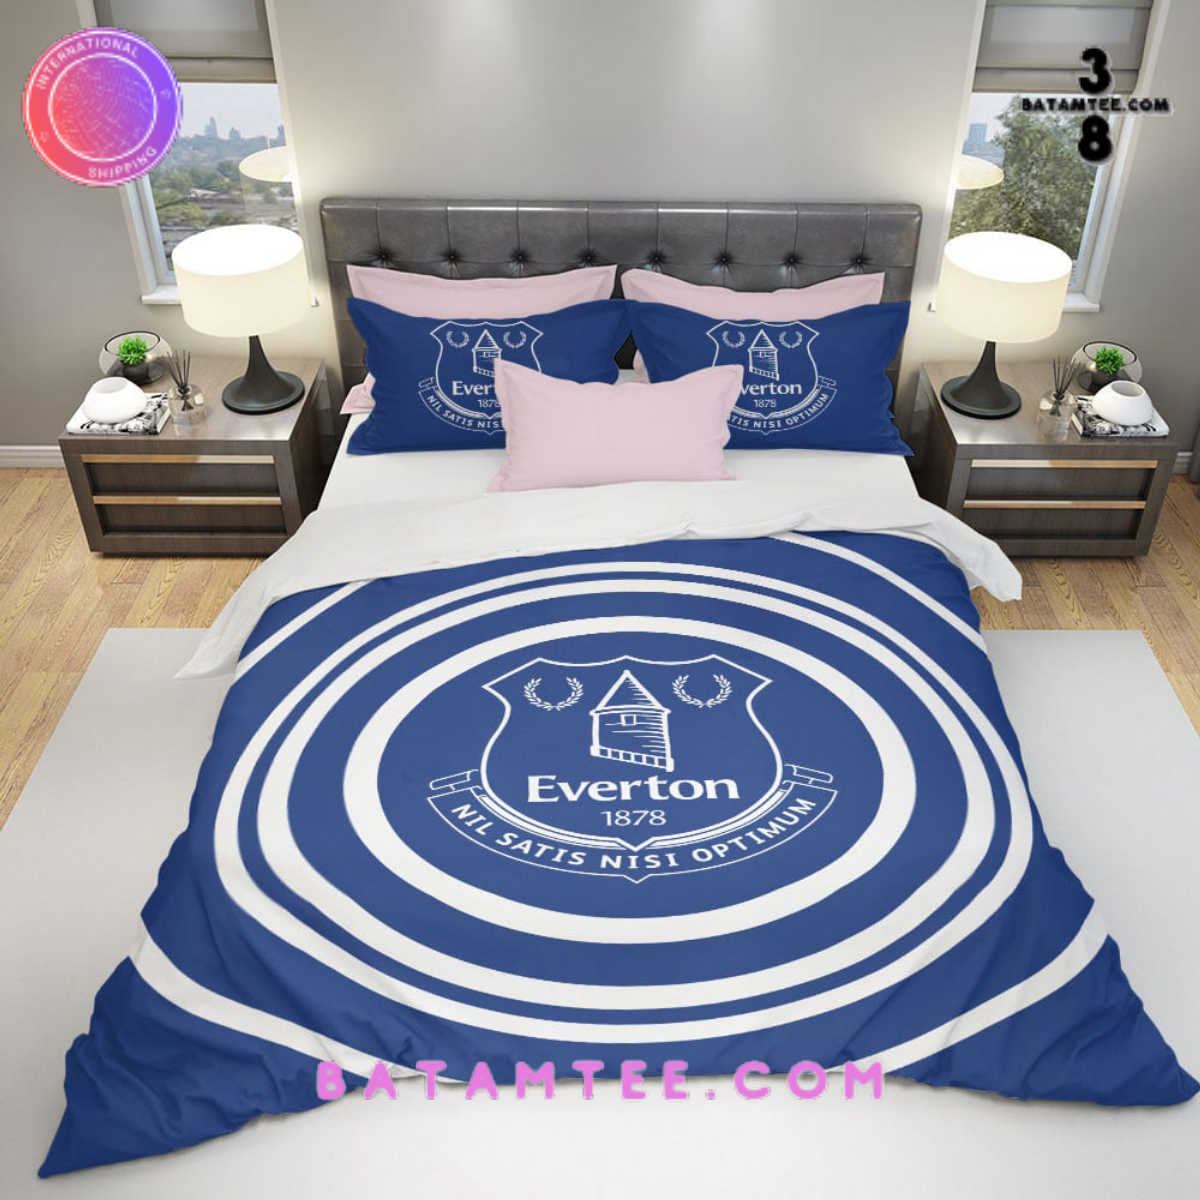 New Bedding Set collection for Everton FC fans-Limited Edition